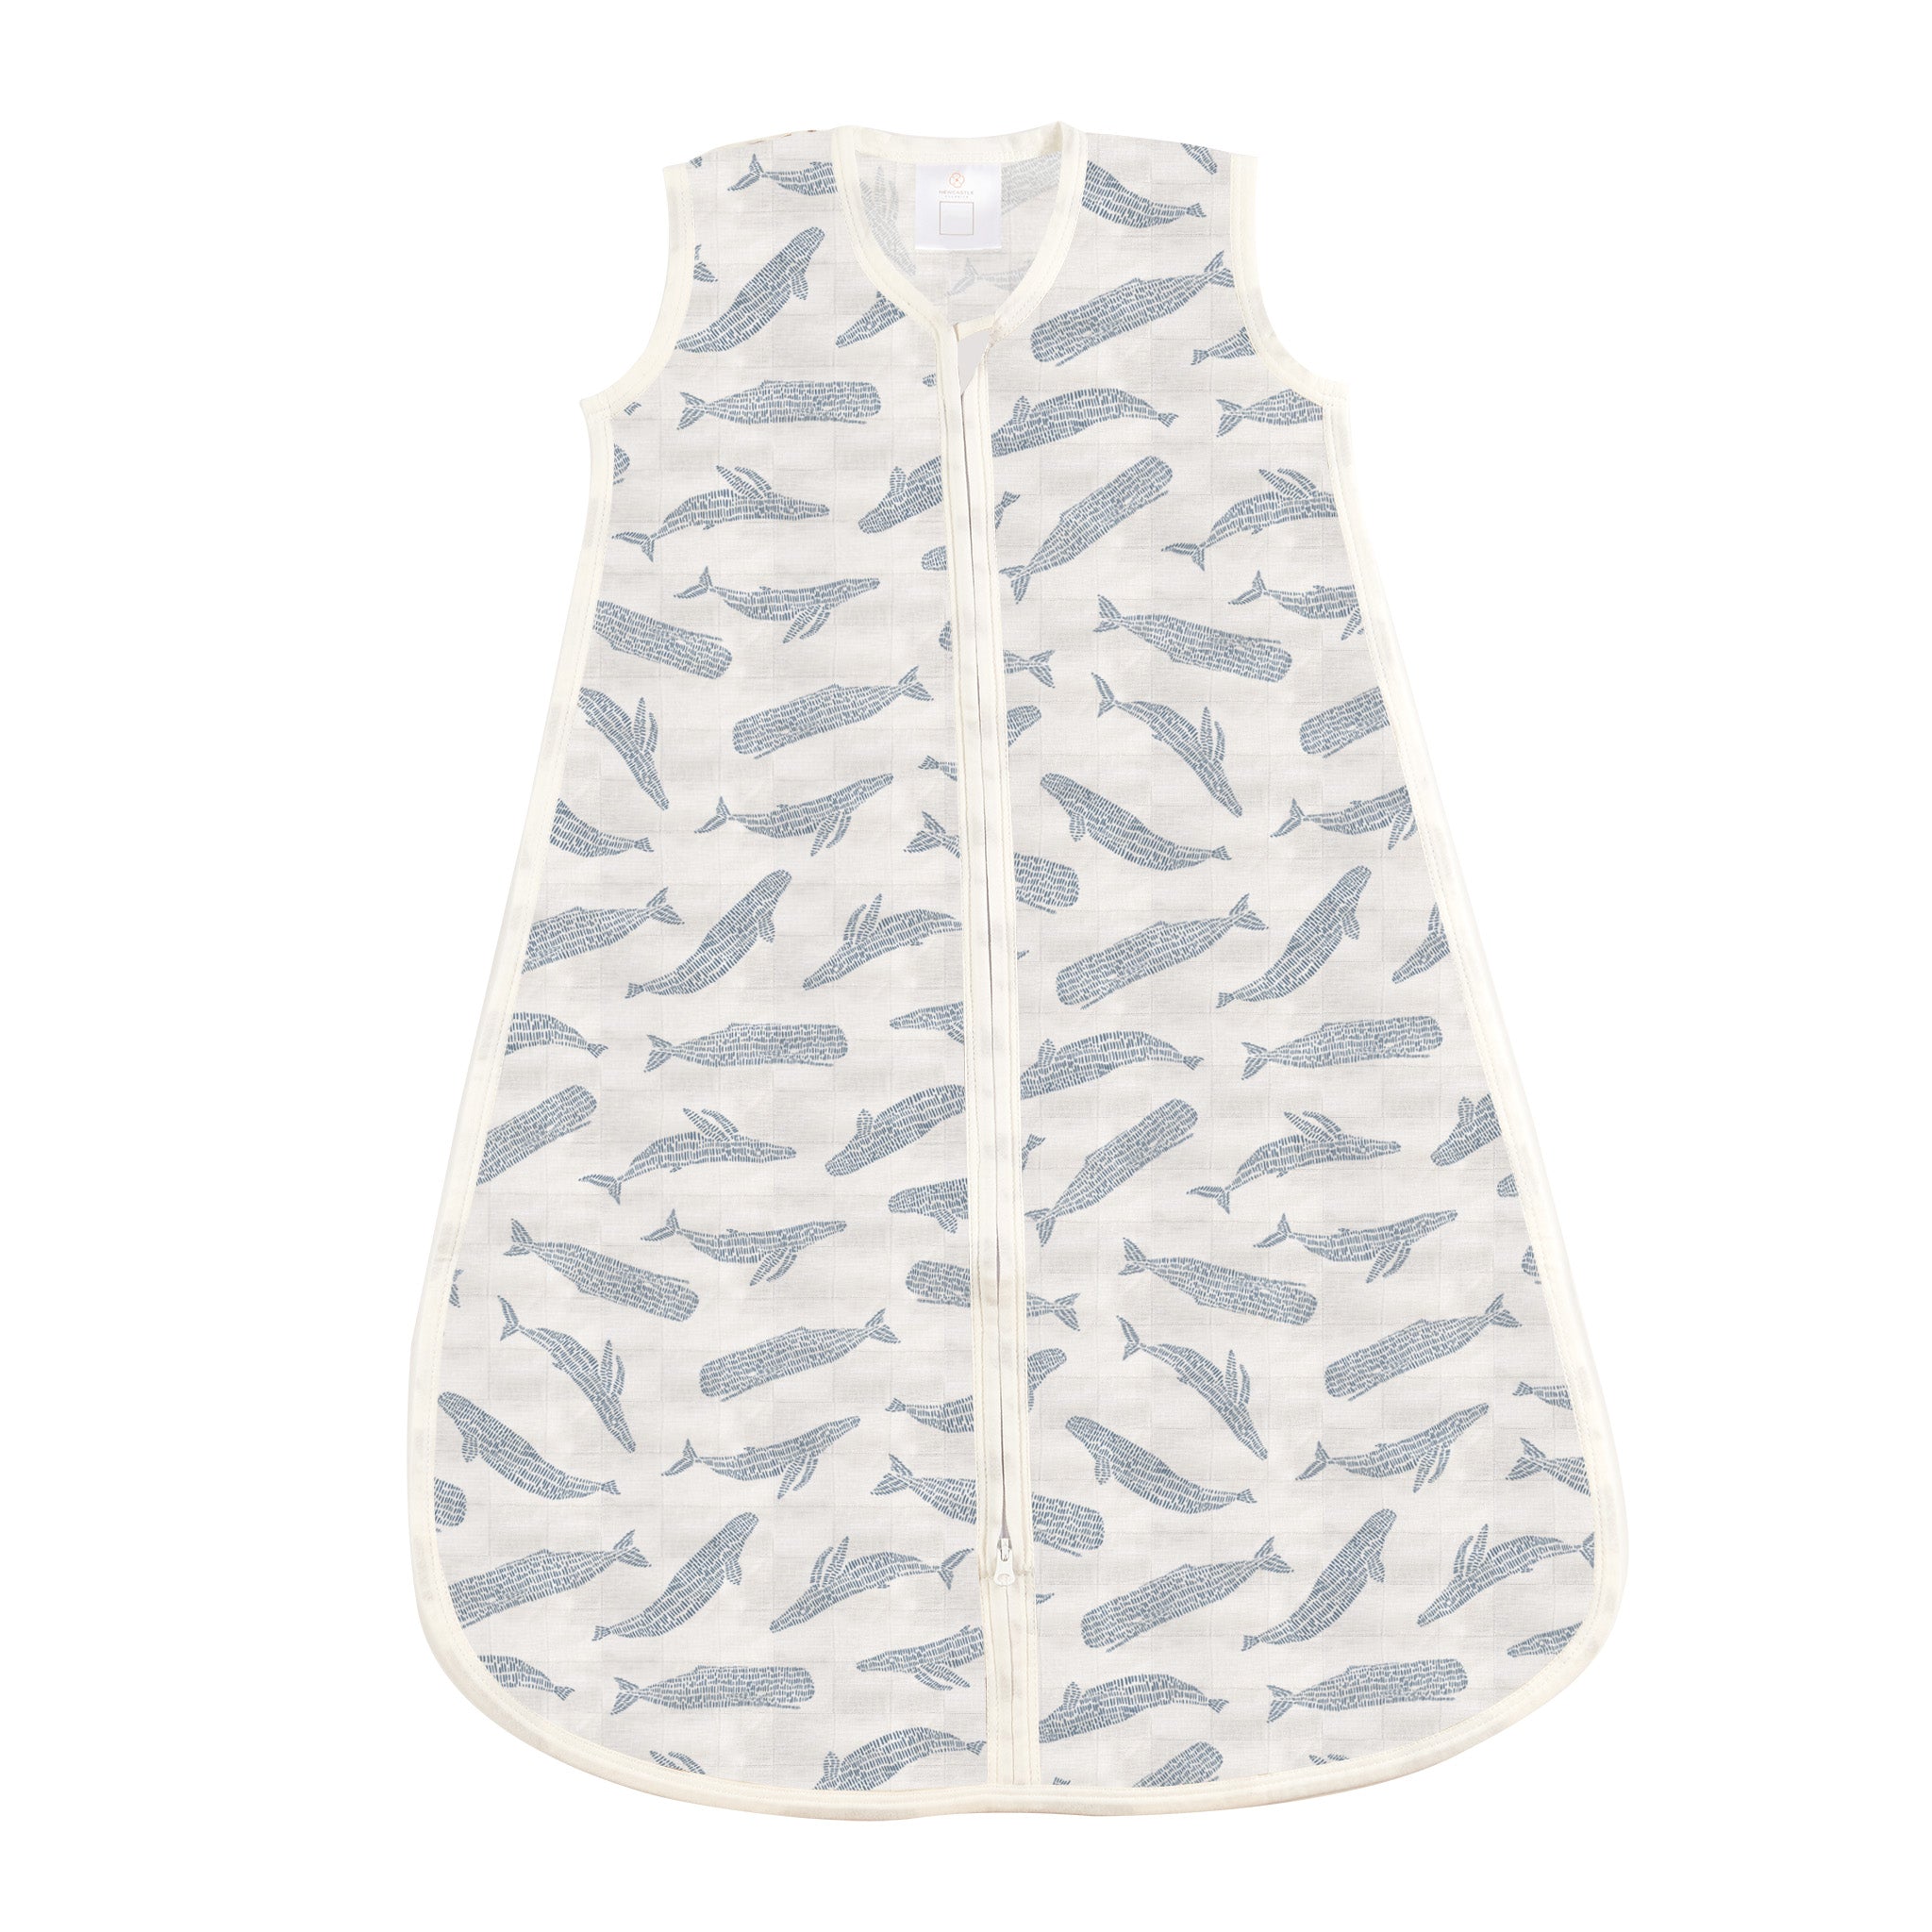 Sleep sack for infants with whales